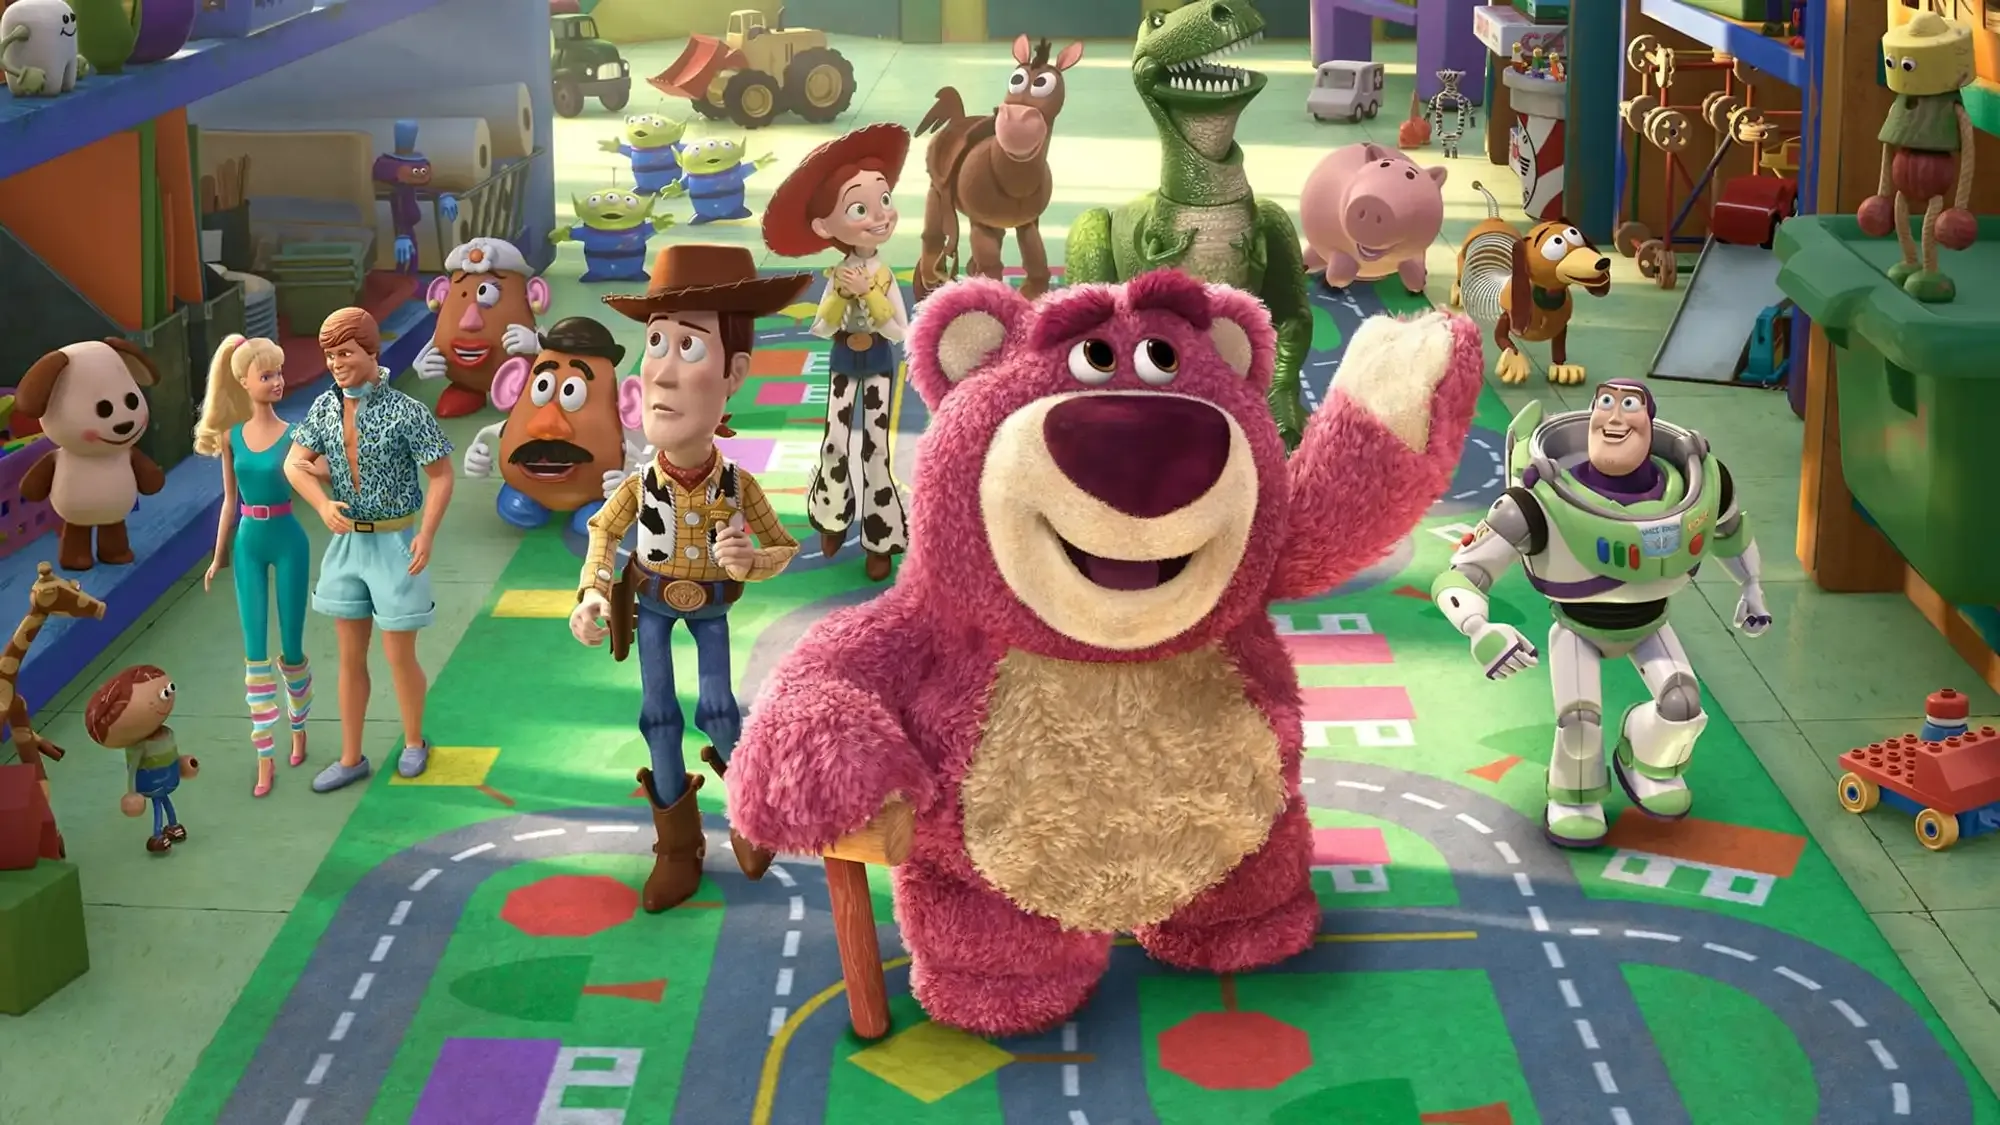 Toy Story 3 movie review